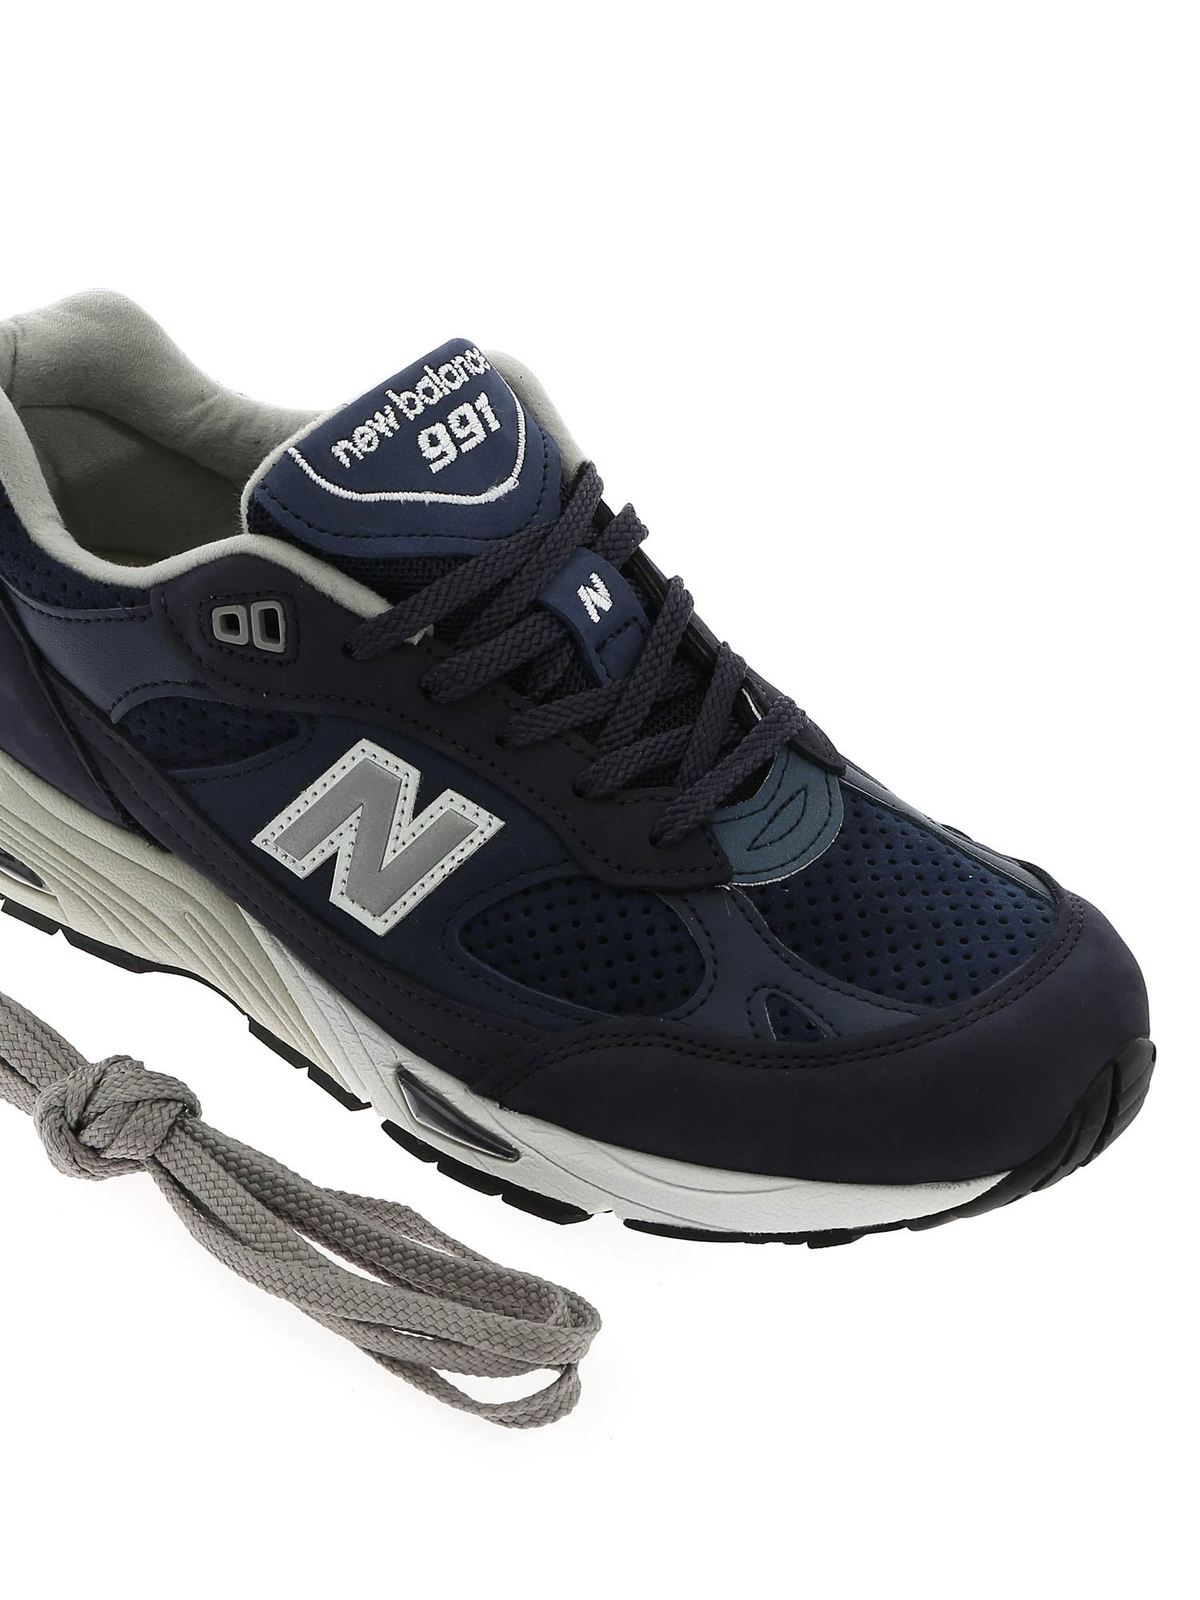 Trainers New Balance - Made in UK 991 sneakers in blue and grey ...